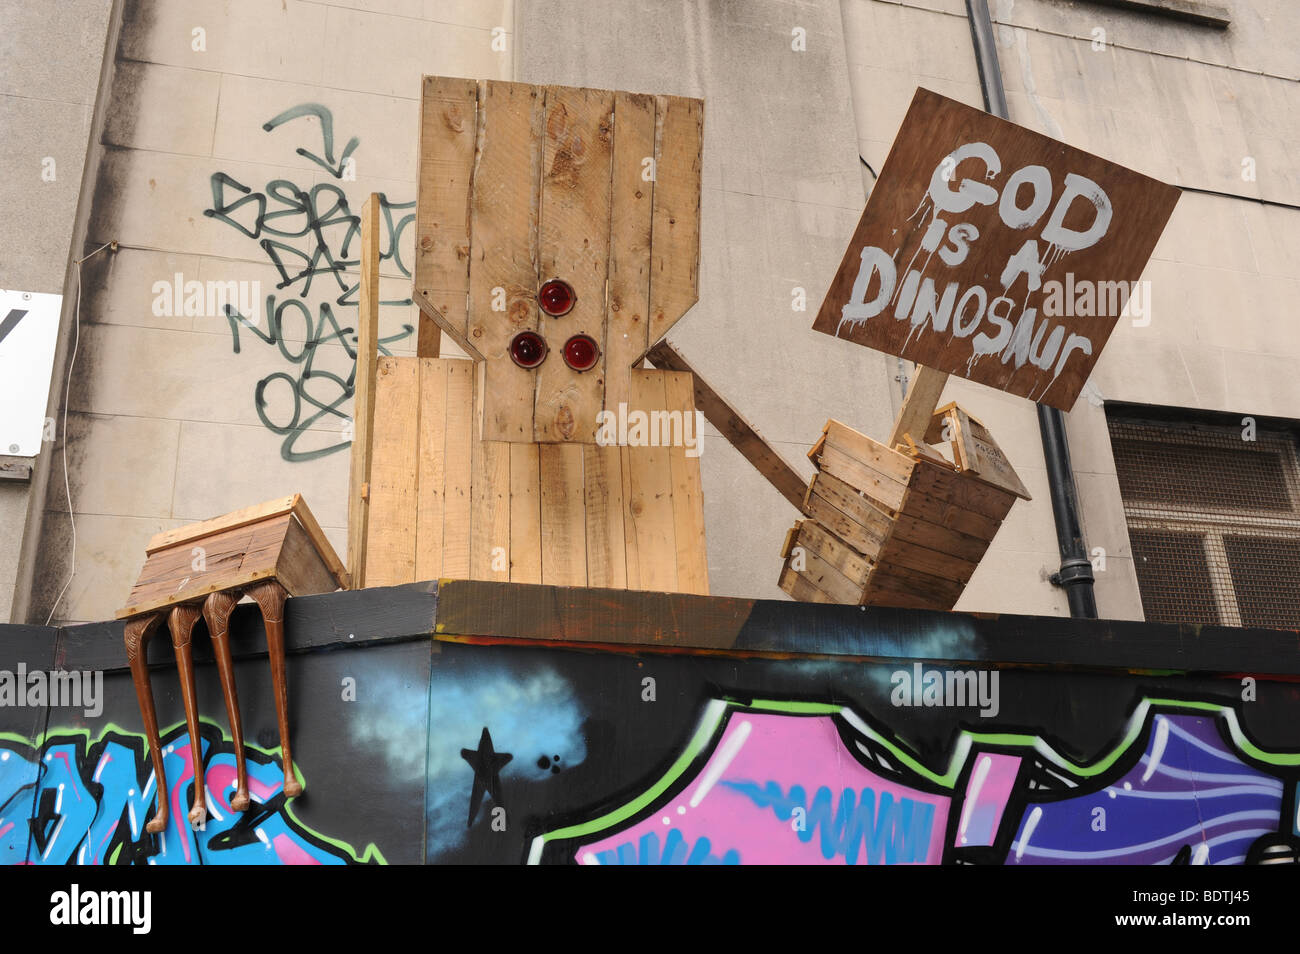 God is a Dinosaur funny wooden sculpture in Brighton UK Stock Photo